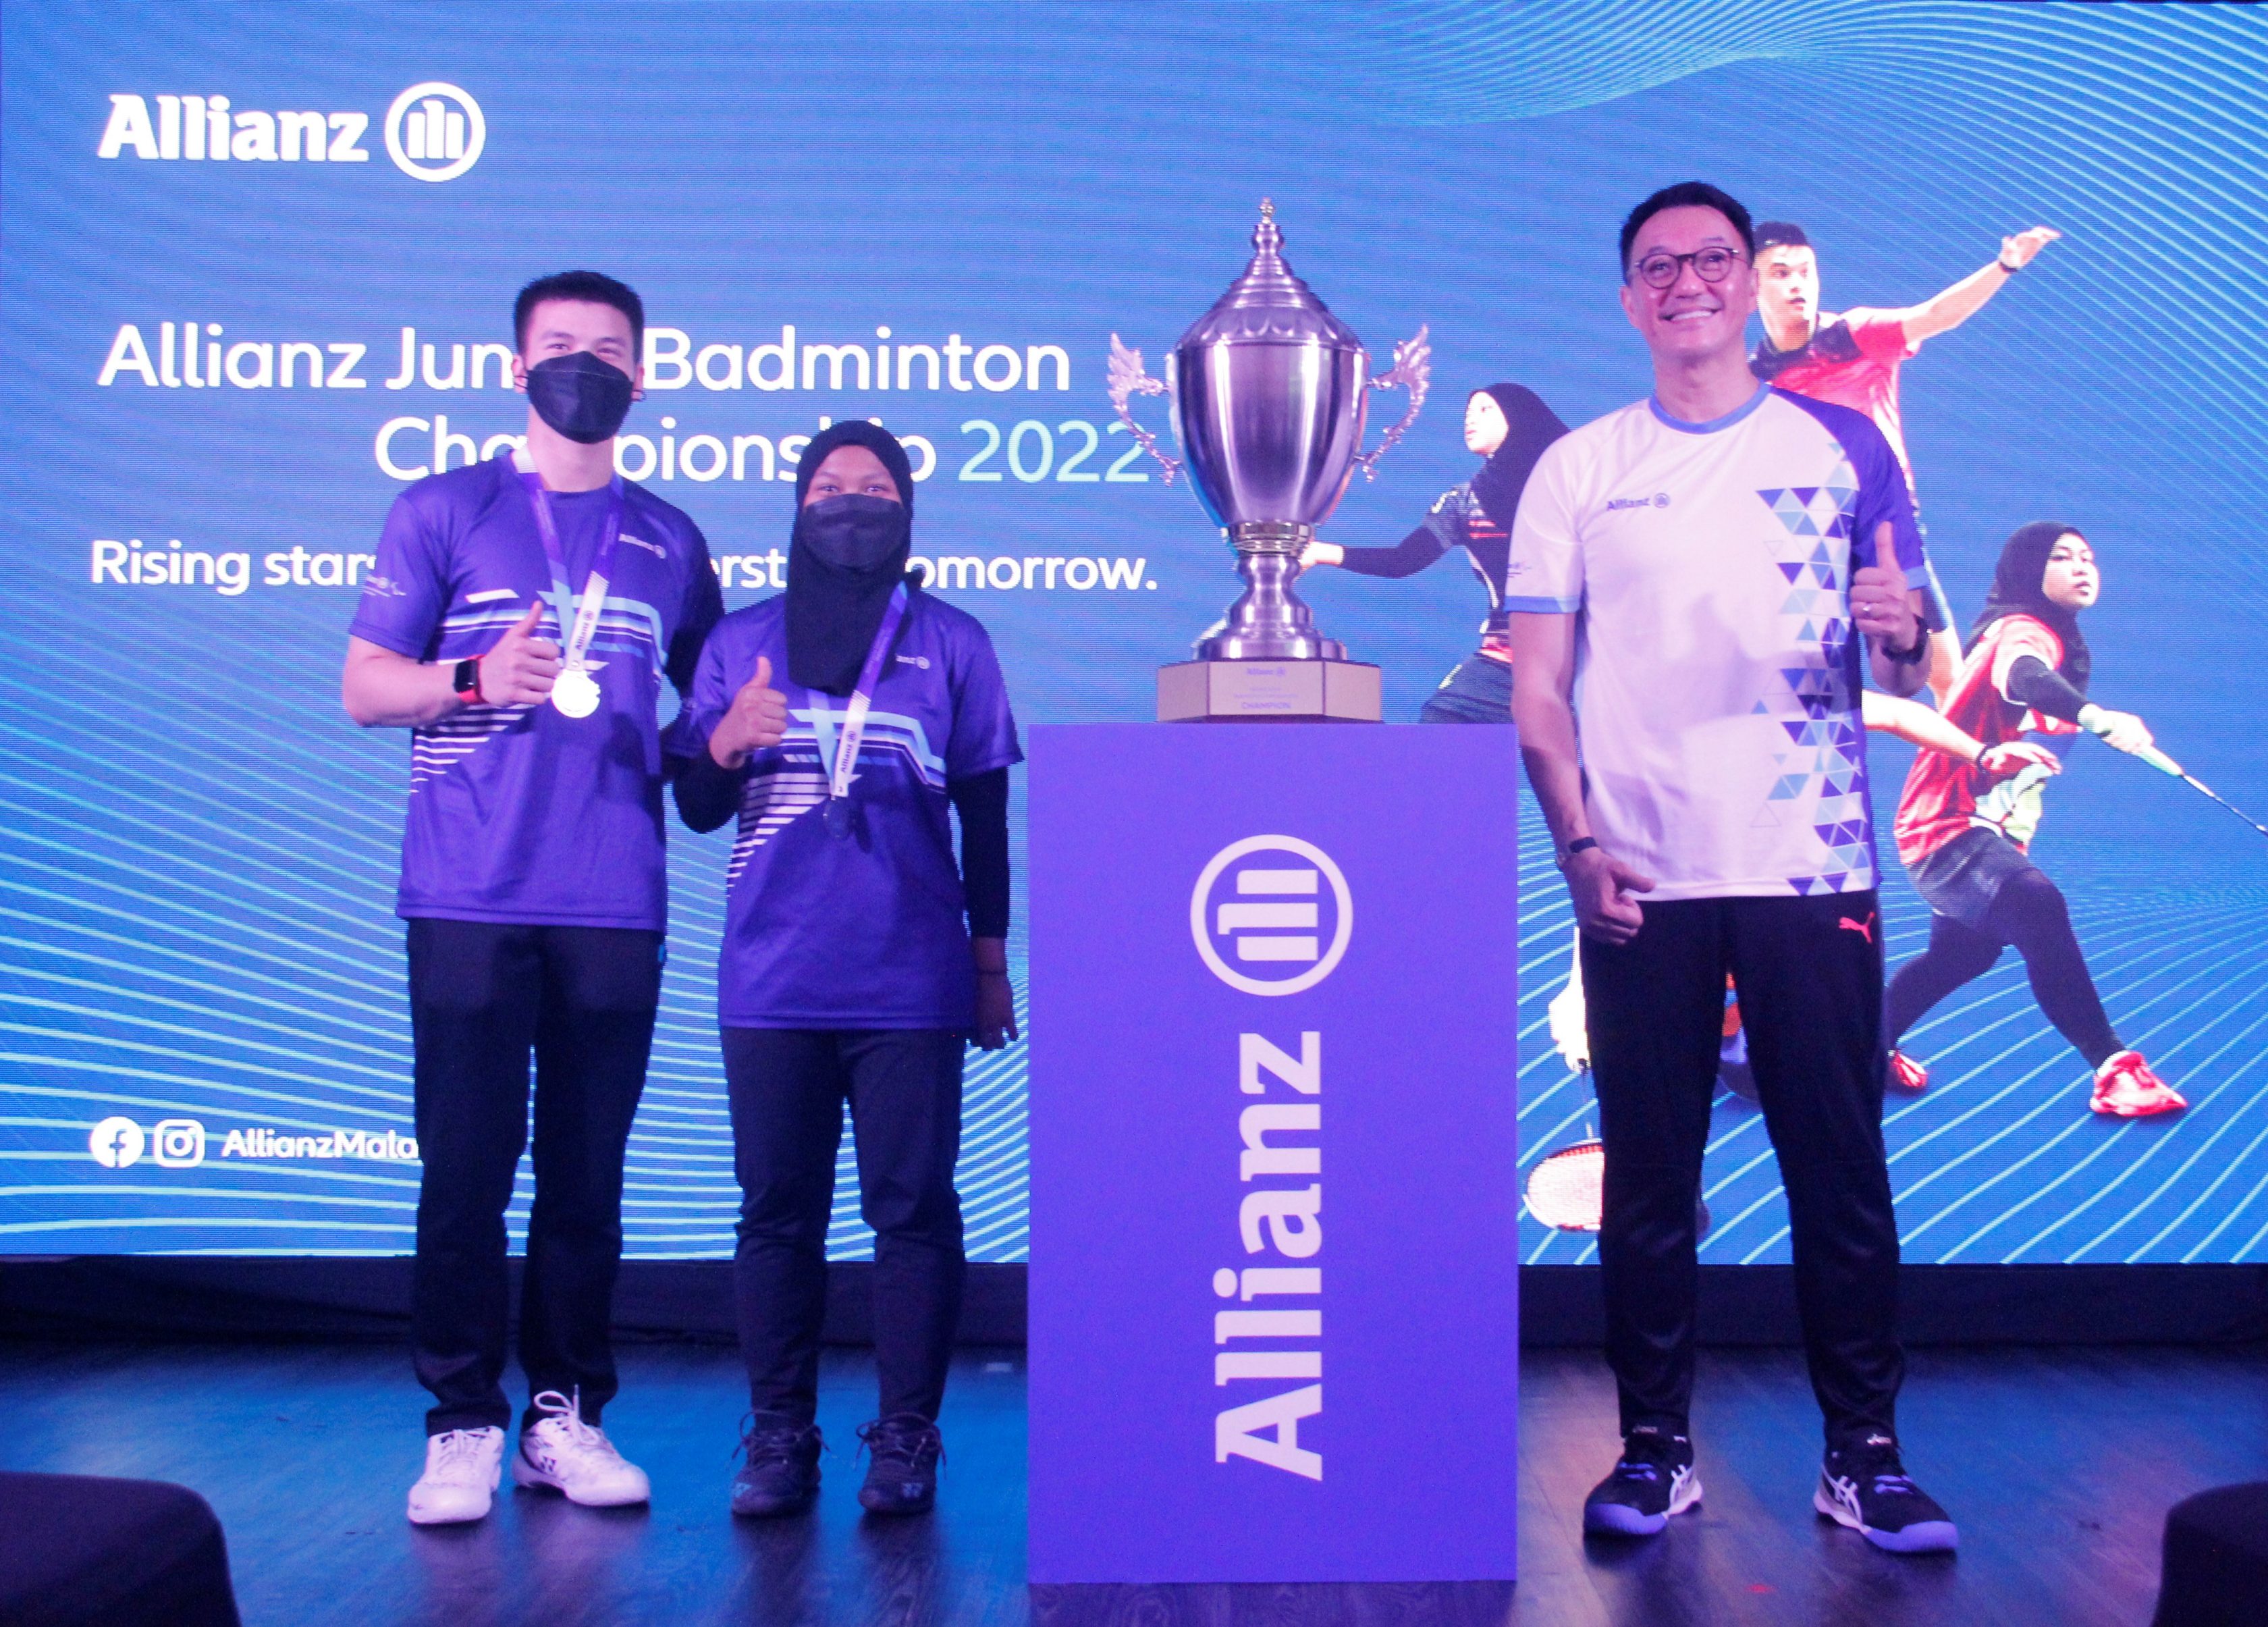 Allianz Malaysia Berhad CEO, Sean Wang (right), flanked by national players Siti Nurshuhaini Azman and Muhammad Fazriq Mohamad Razif (left) during the launch and prize presentation for the Allianz Junior Badminton Championship 2022